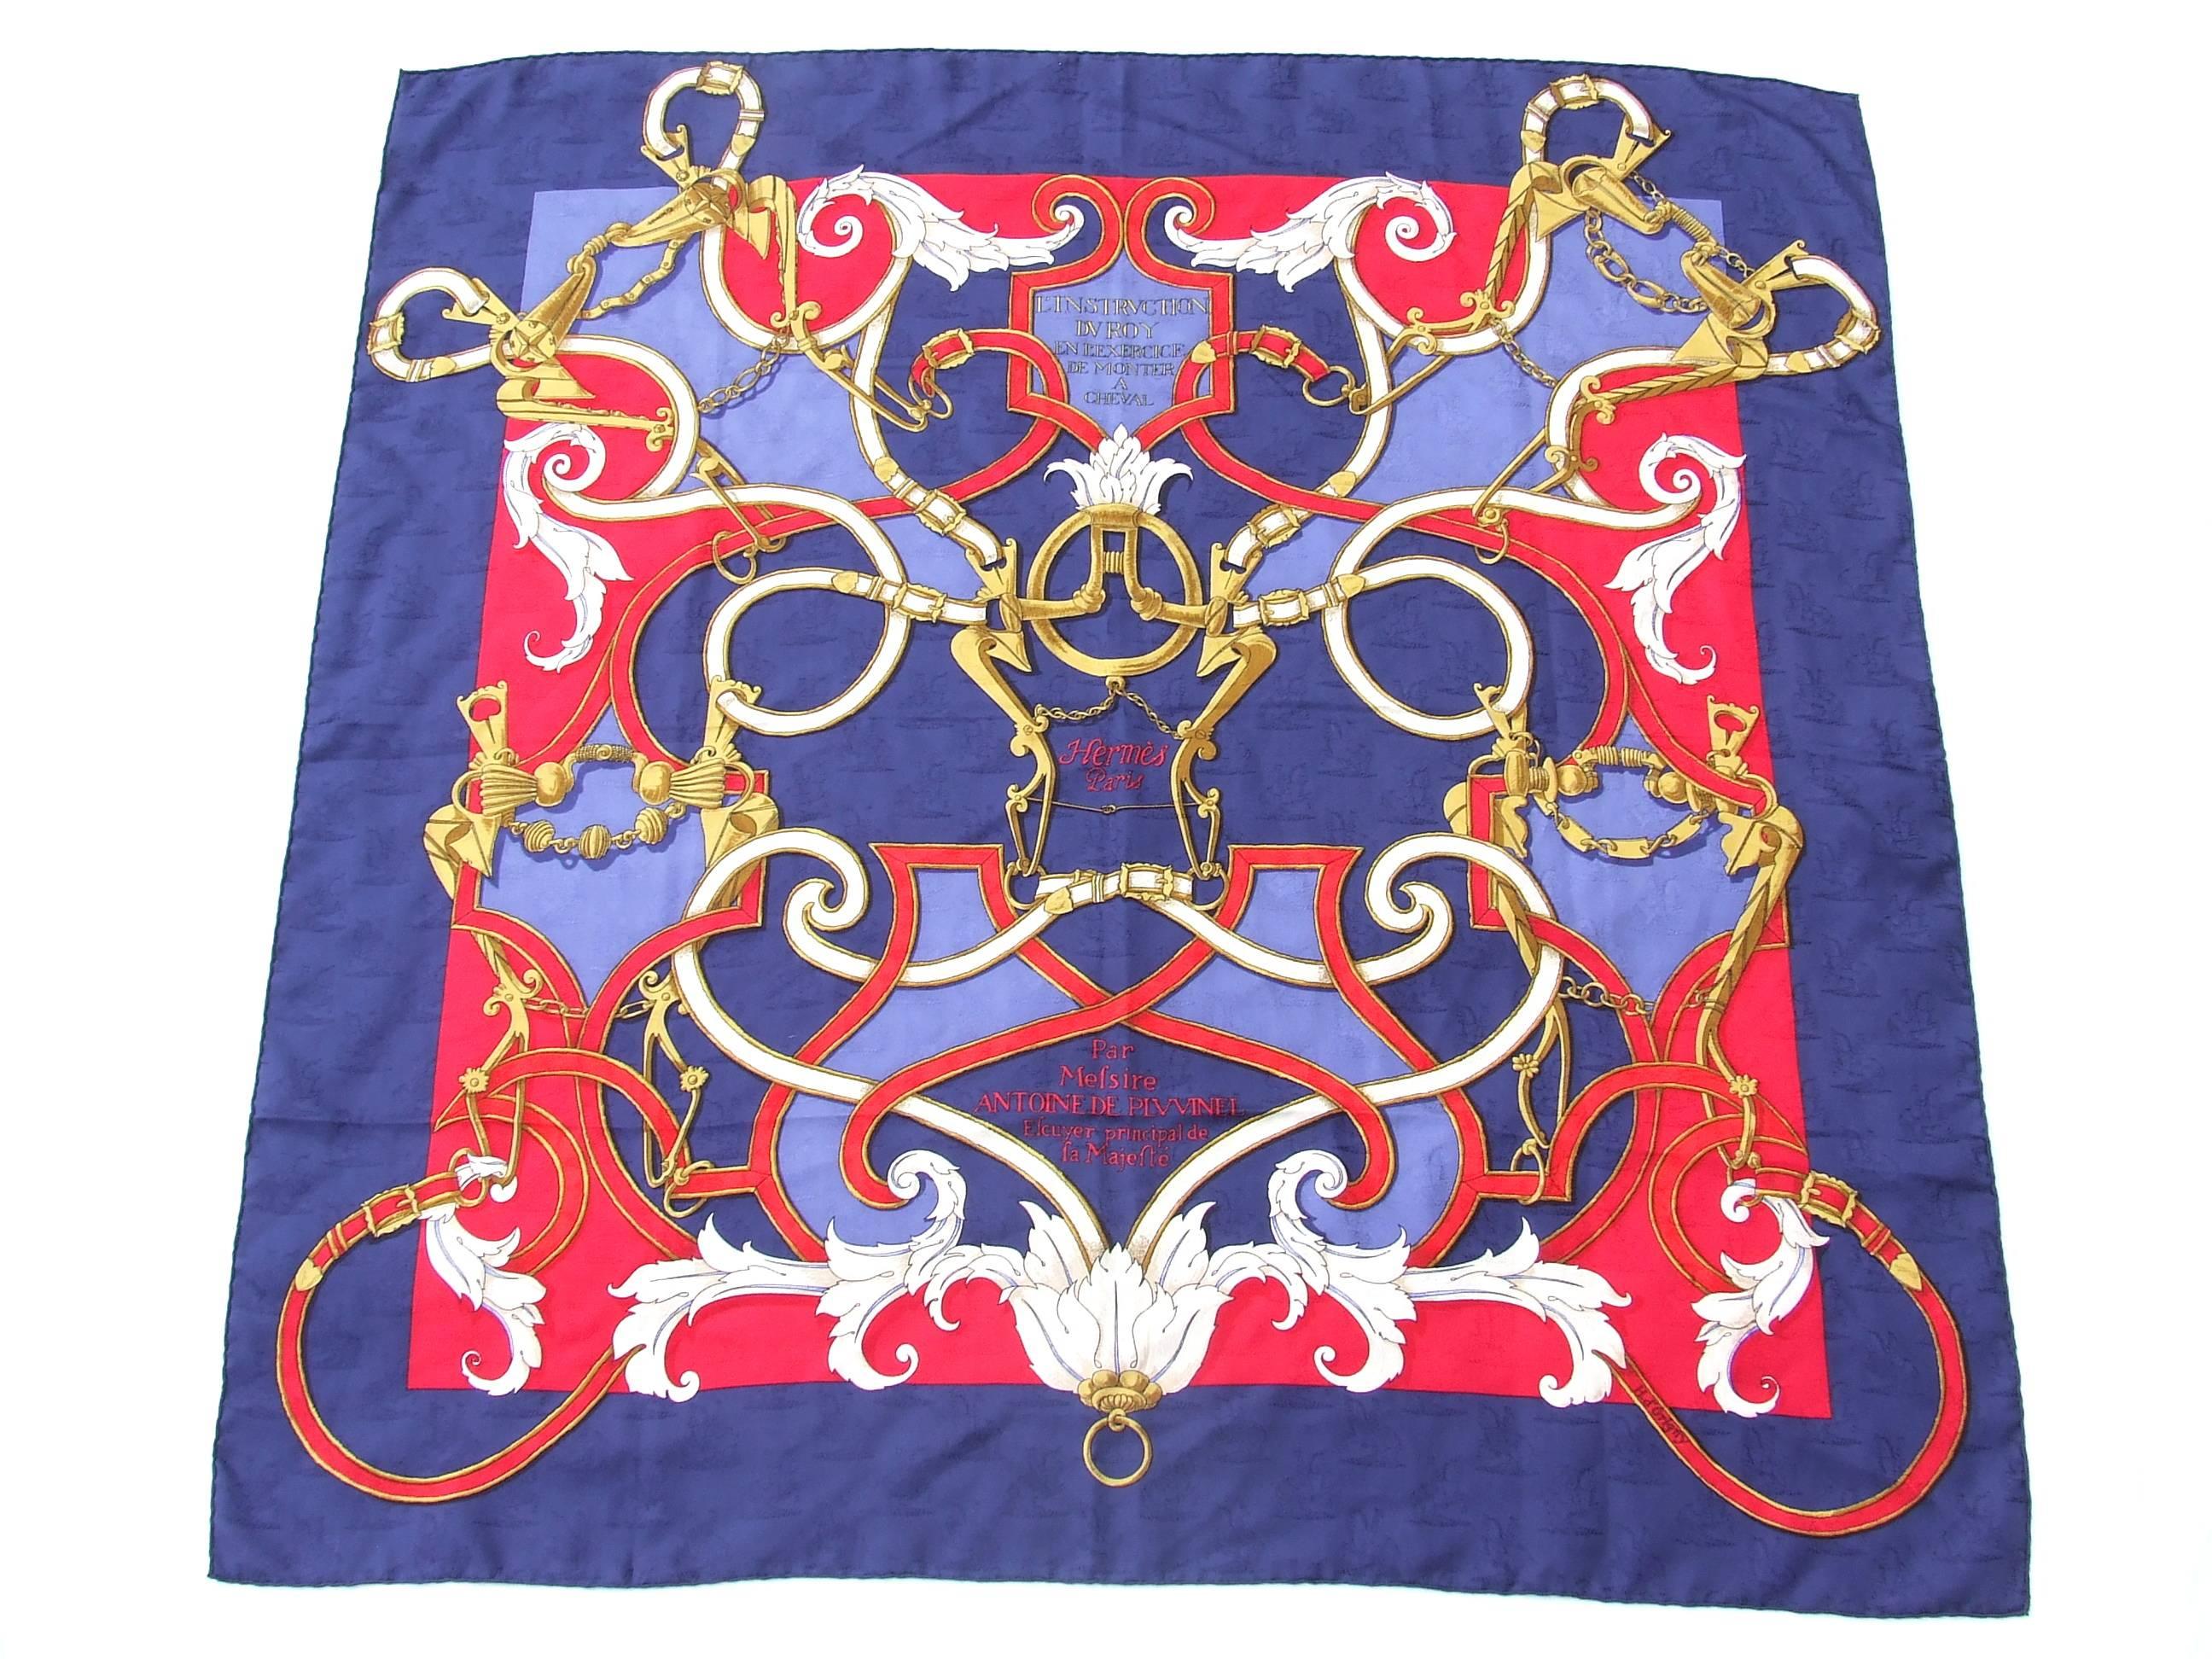 Amazing Authentic Hermes Vintage Scarf

Pattern: "L INSTRUCTION DU ROY EN L'EXERCICE DE MONTER A CHEVAL" (instruction of the king in the exercise of riding horses)

Designed by Henri d'Origny in 1993

The scarf is decorated with small